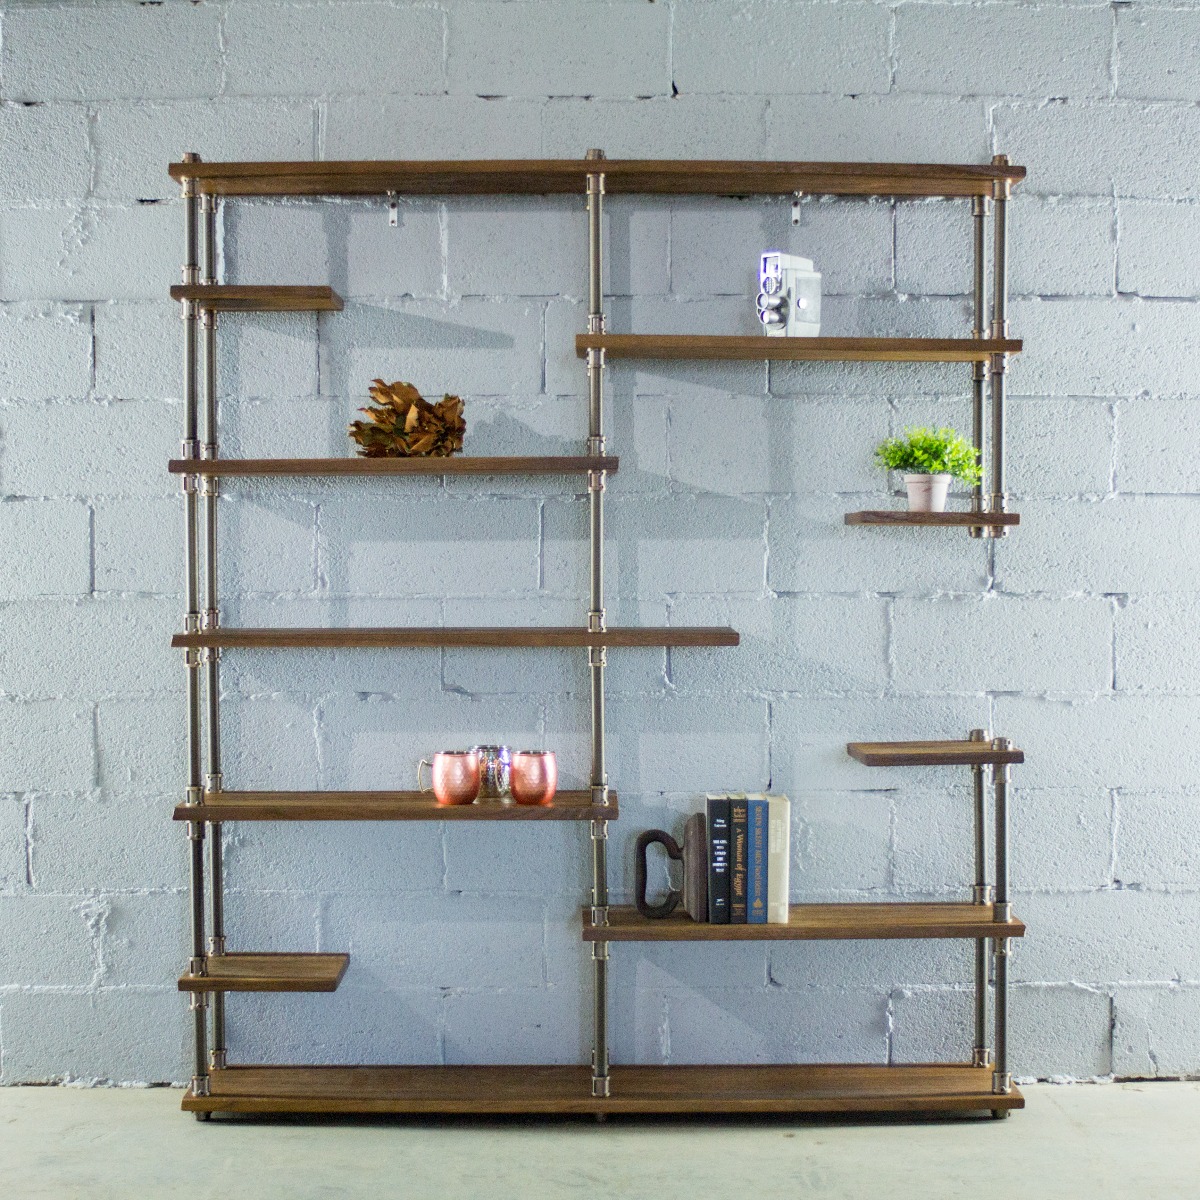 Moo1-bz-bz-br Nashville Industrial Mid-century Etagere Bookcase, Rustic Bronze Combo With Light Brown Stained Wood